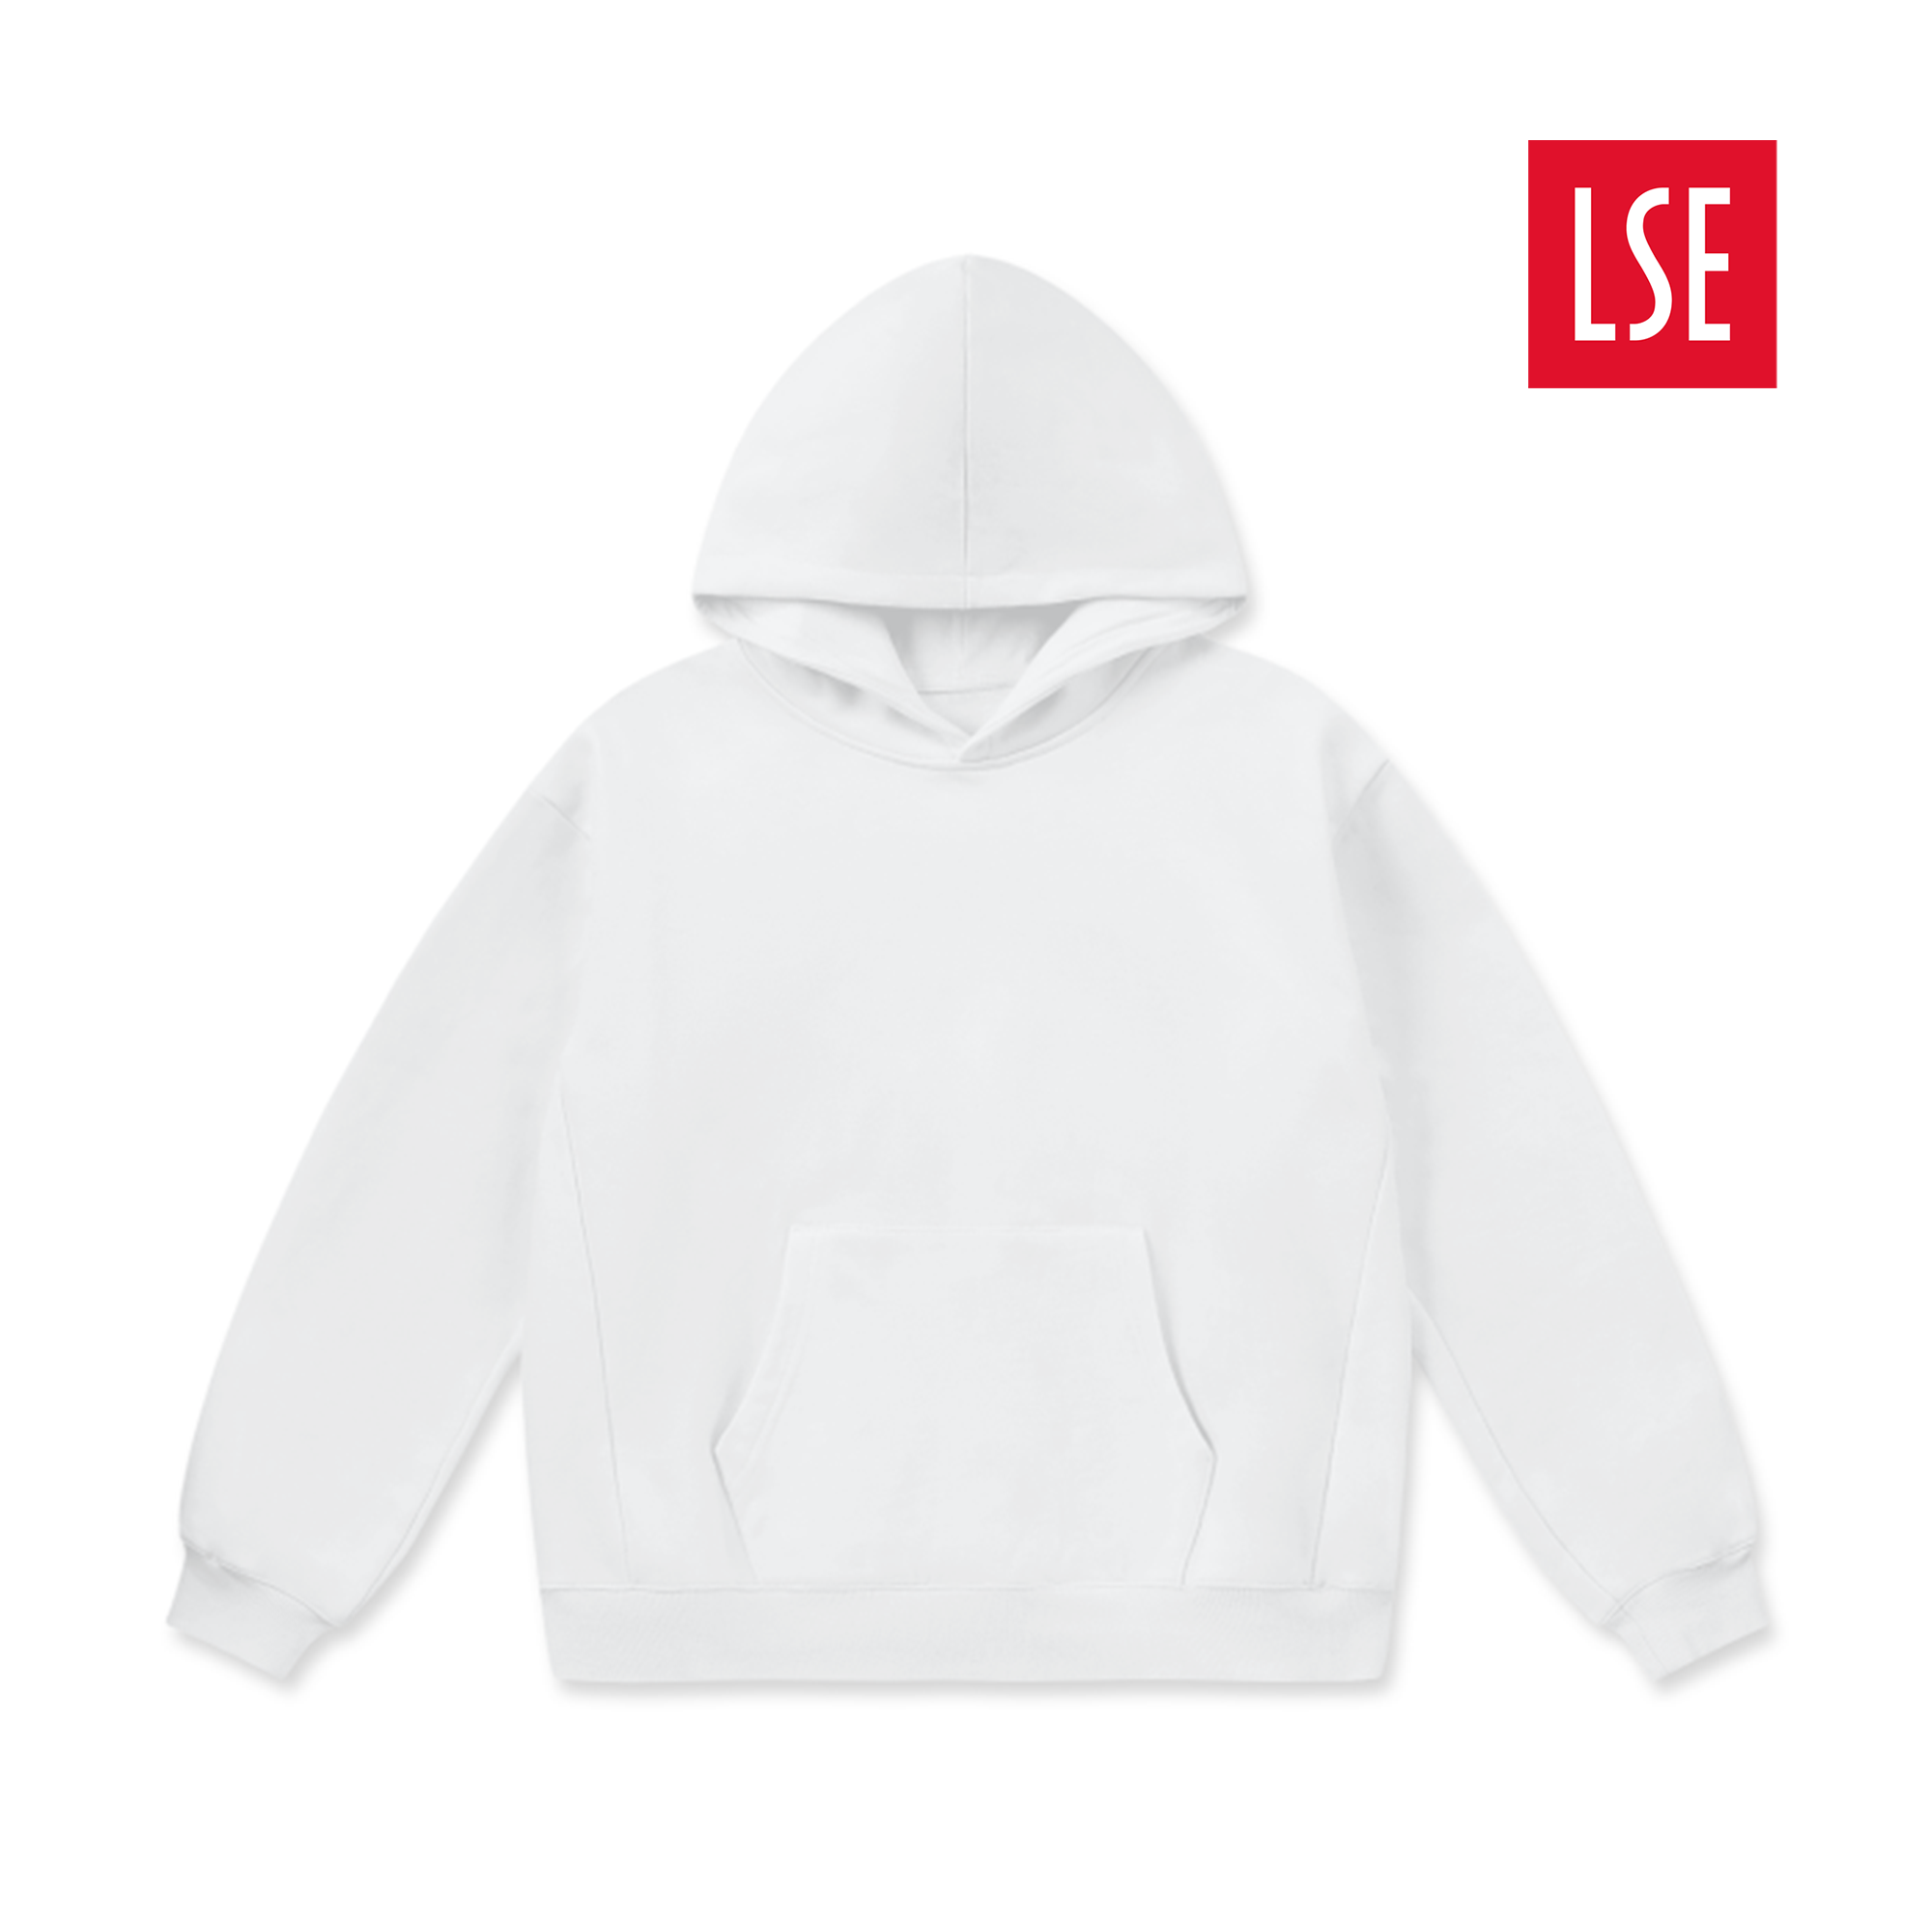 LCC Super Weighted Hoodie - LSE (Classic)